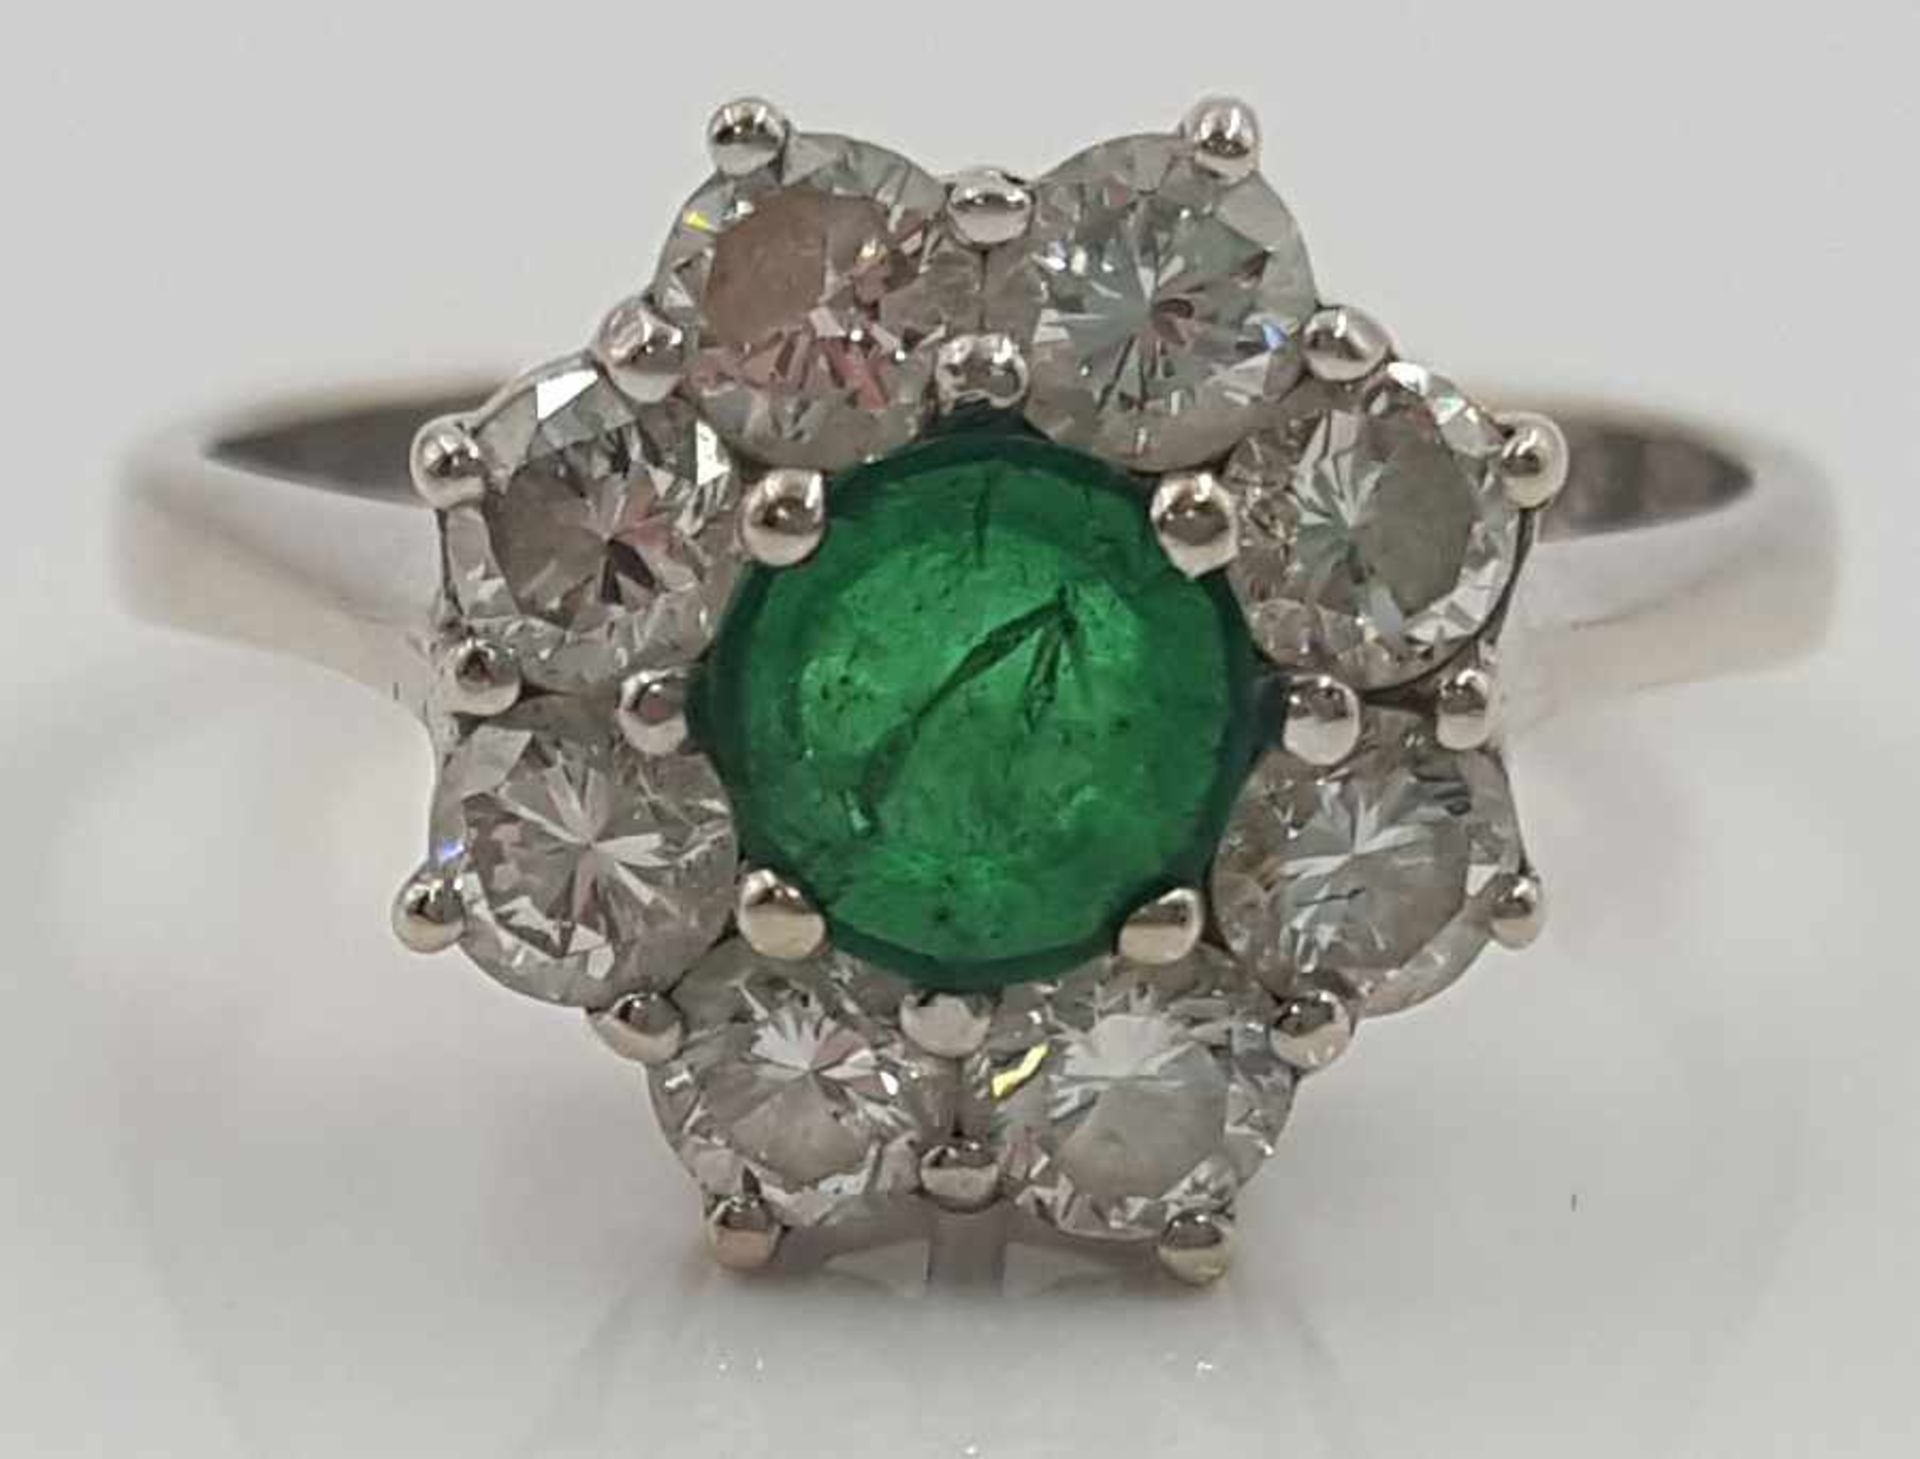 Ring, white gold 585, with central emerald and 8 diamonds.